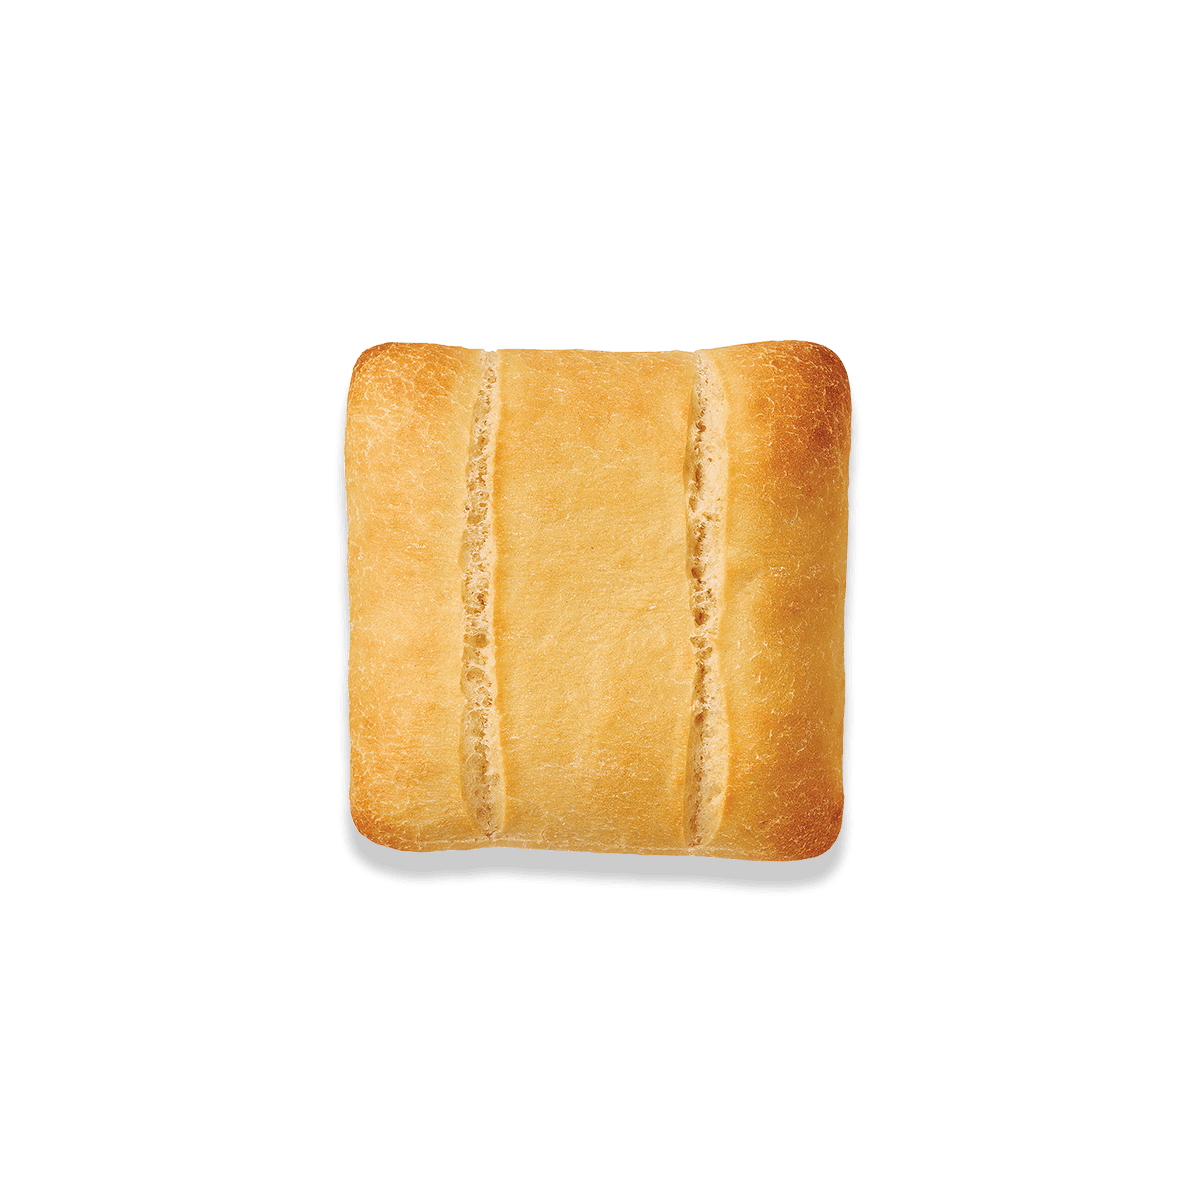 top view of soft artisan bread